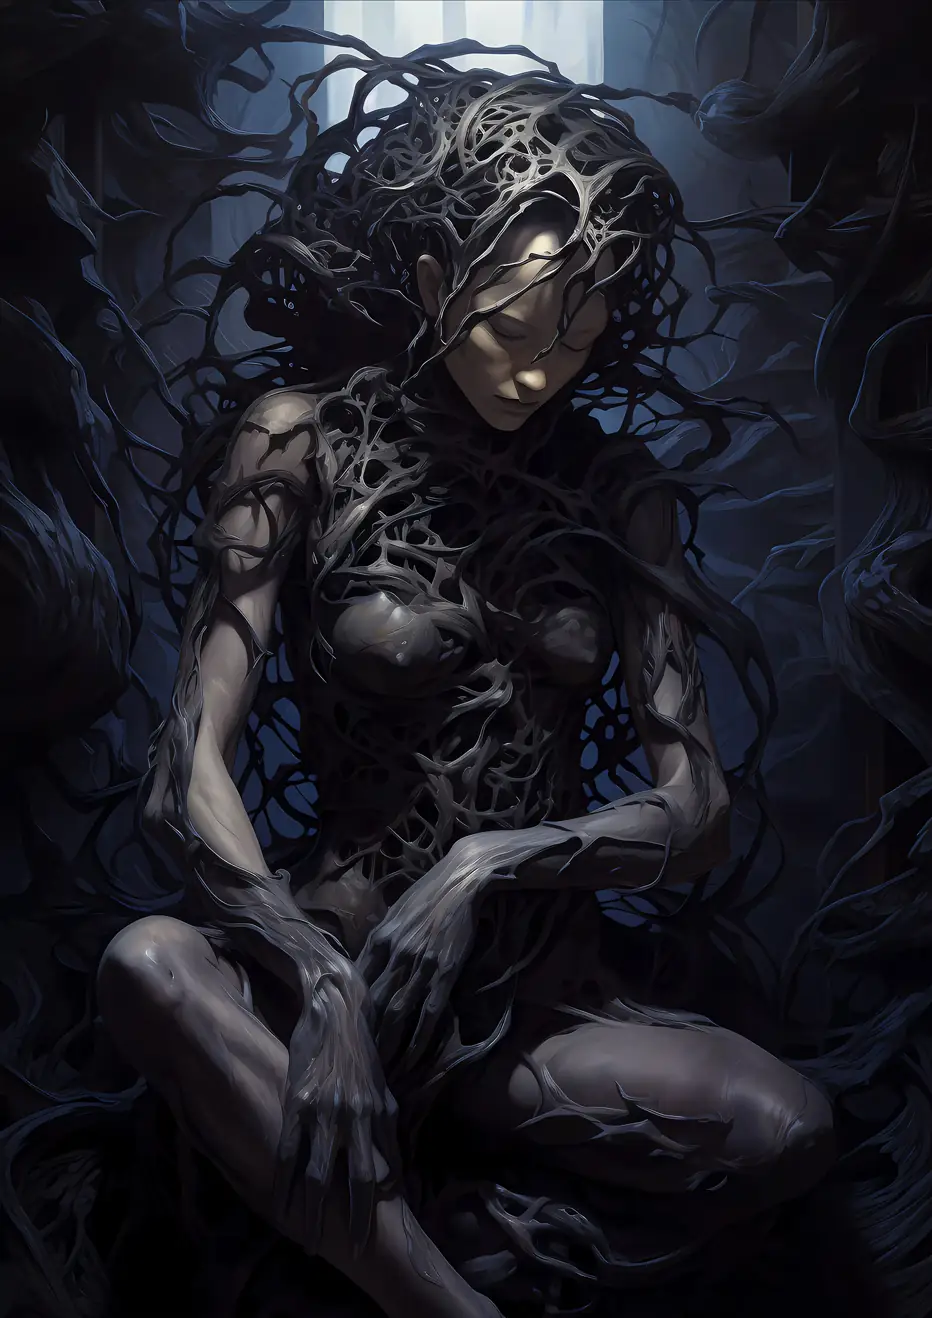 A mystical nymph sits peacefully, her chest and hair intertwined with faint purple vines.